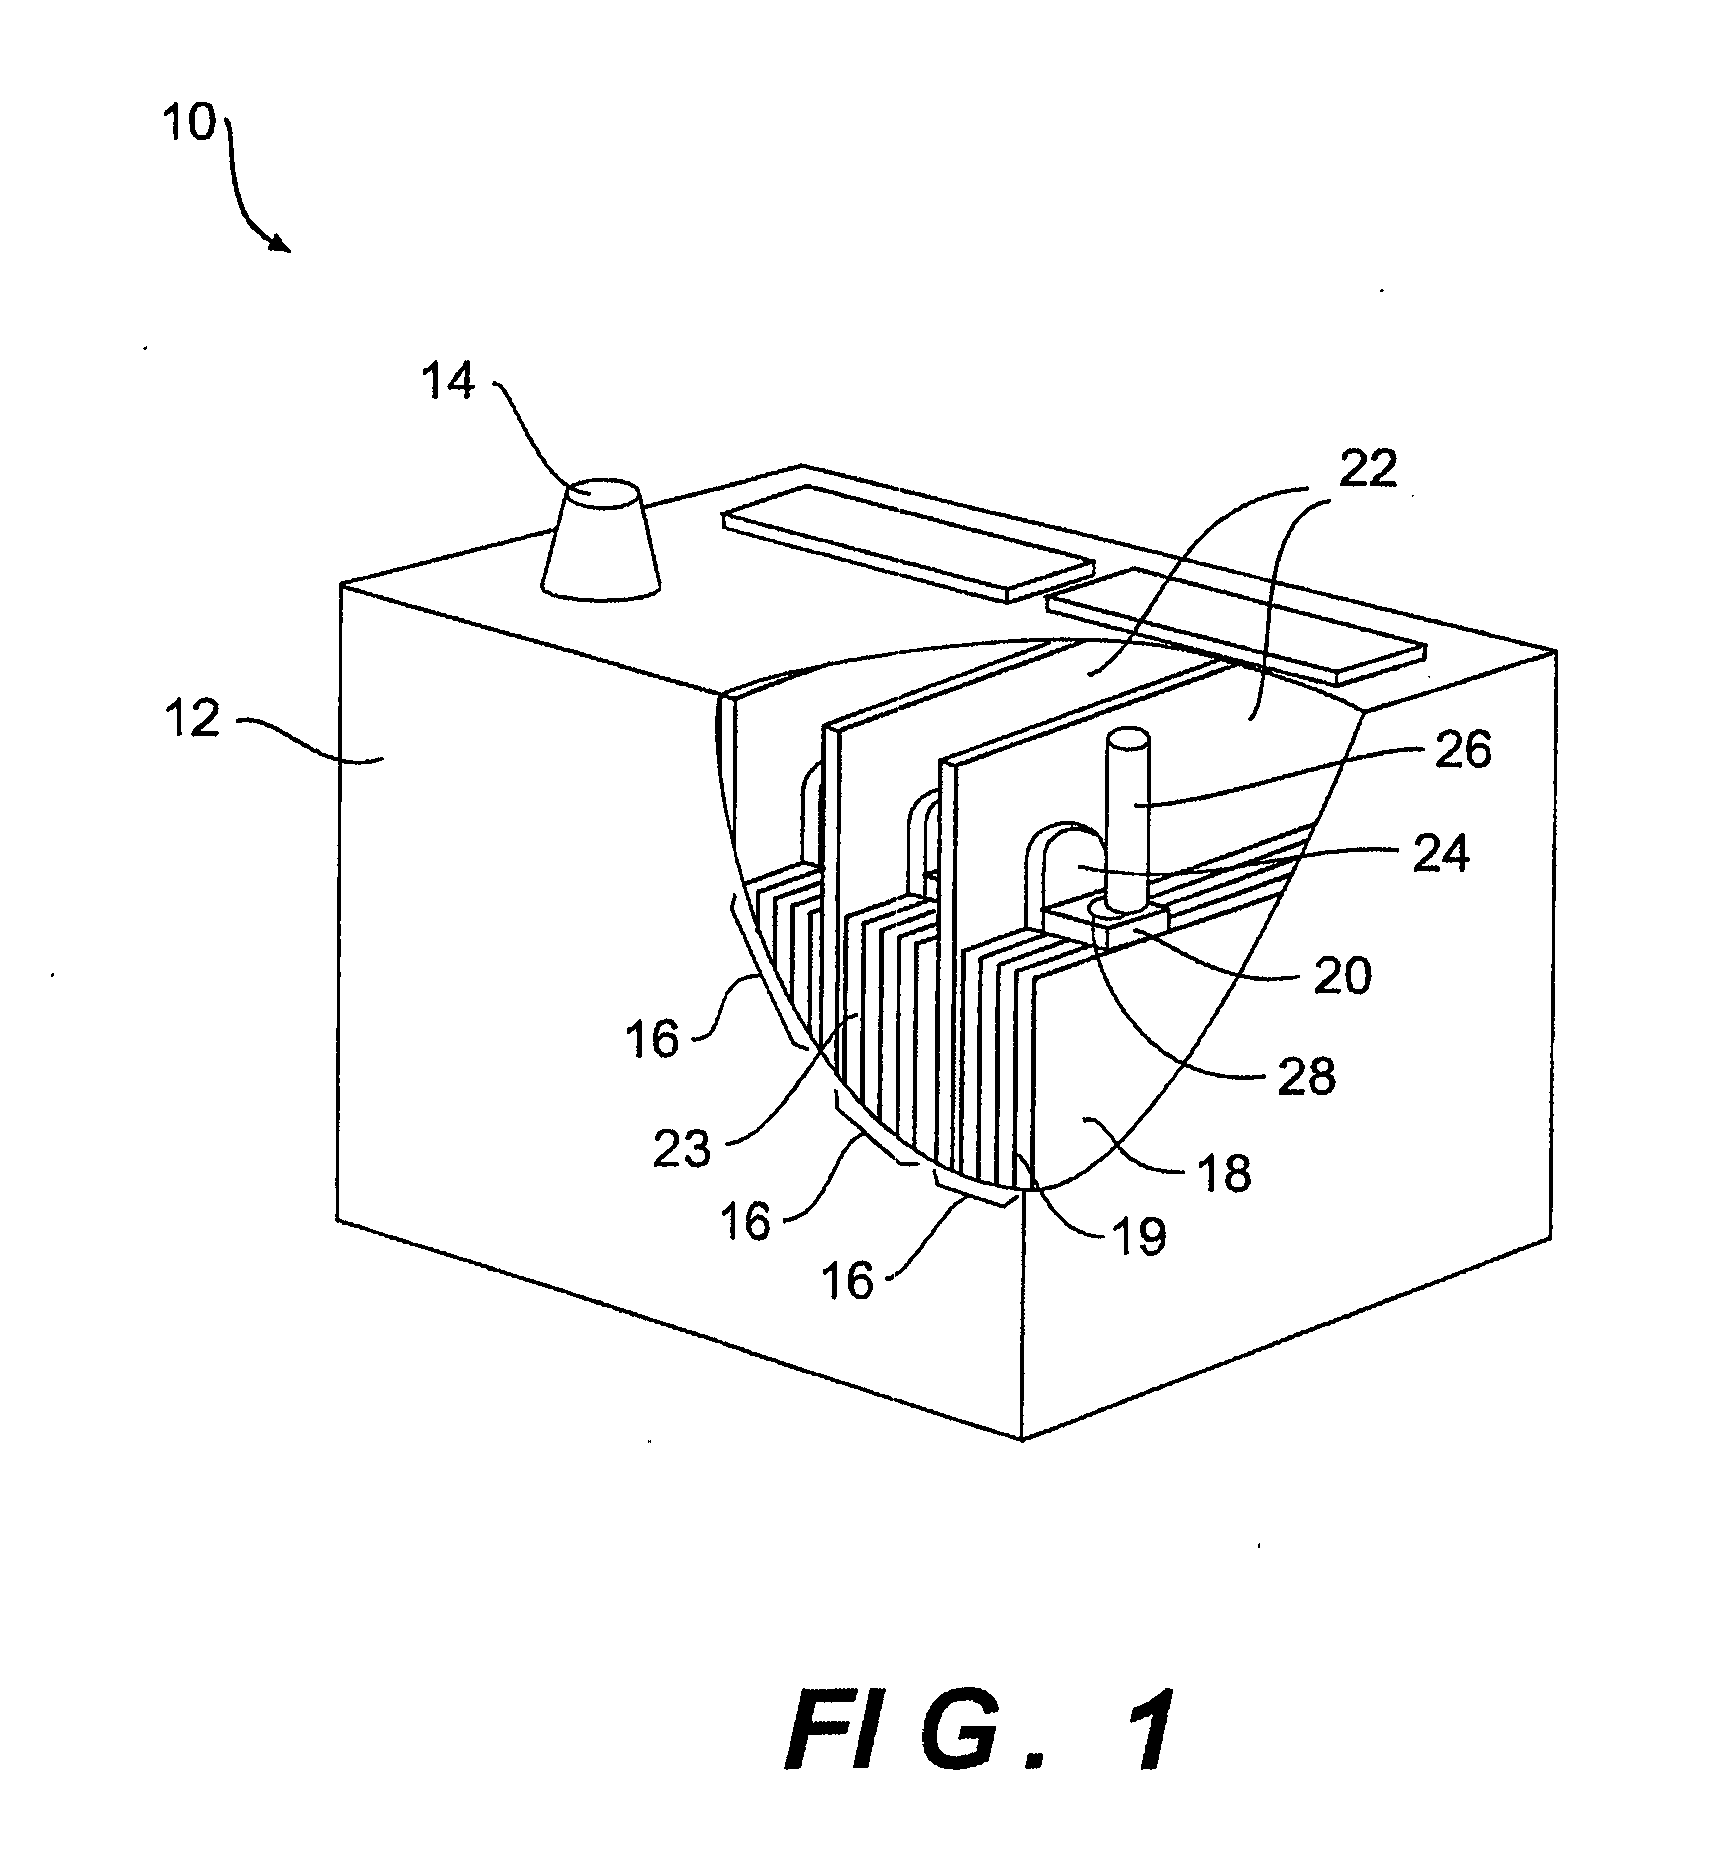 Battery including electrically conductive phosphate glass components